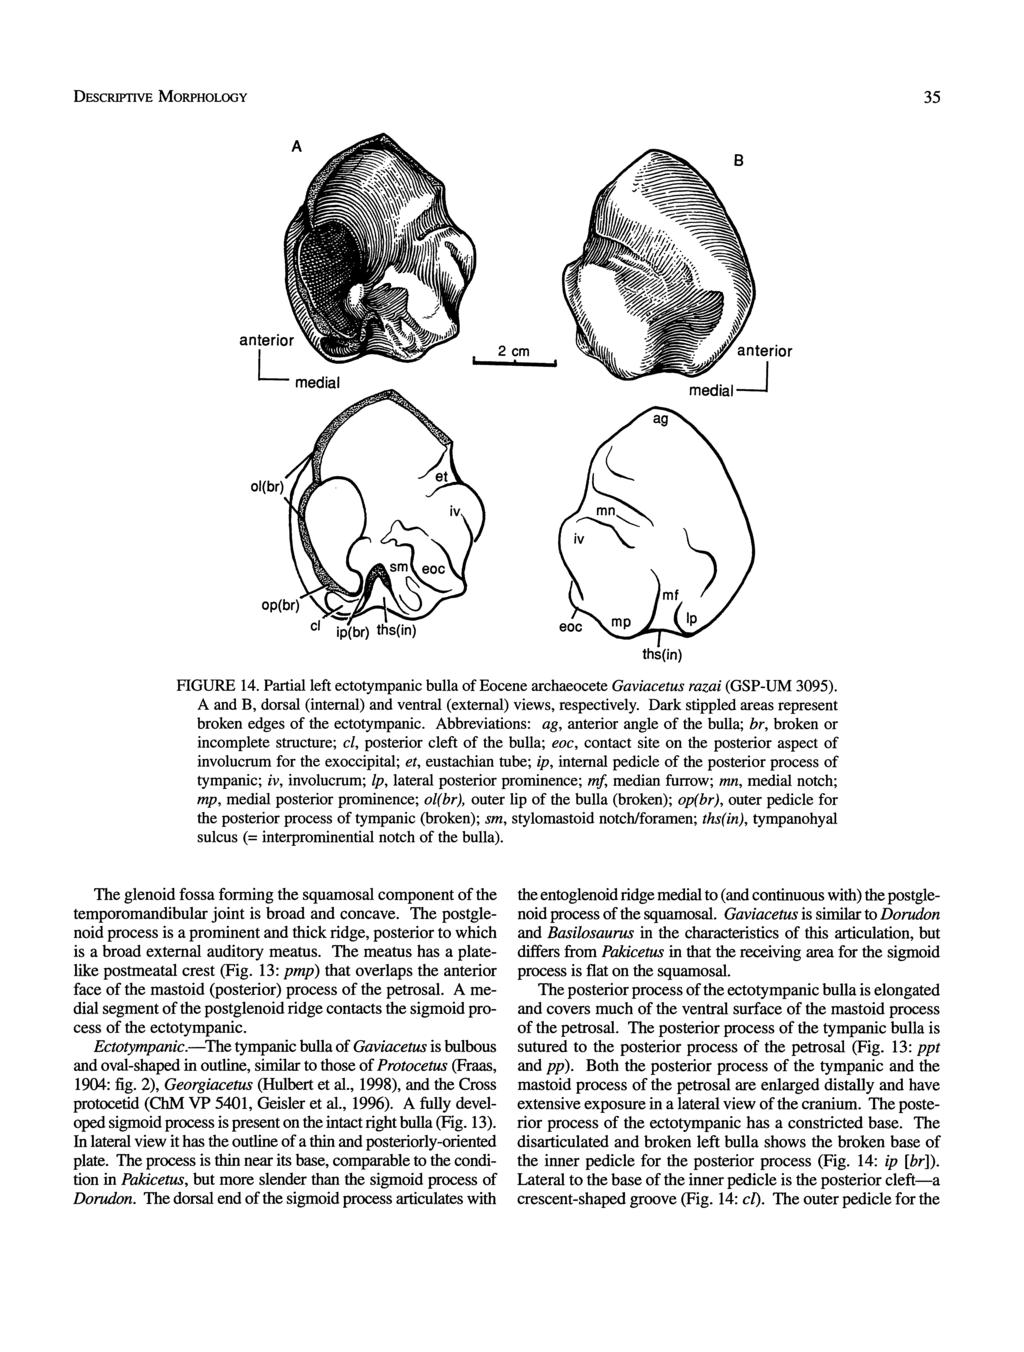 - medial medial FIGURE 14. Partial left ectotympanic bulla of Eocene archaeocete Gaviacetus razai (GSP-UM 3095). A and B, dorsal (internal) and ventral (external) views, respectively.